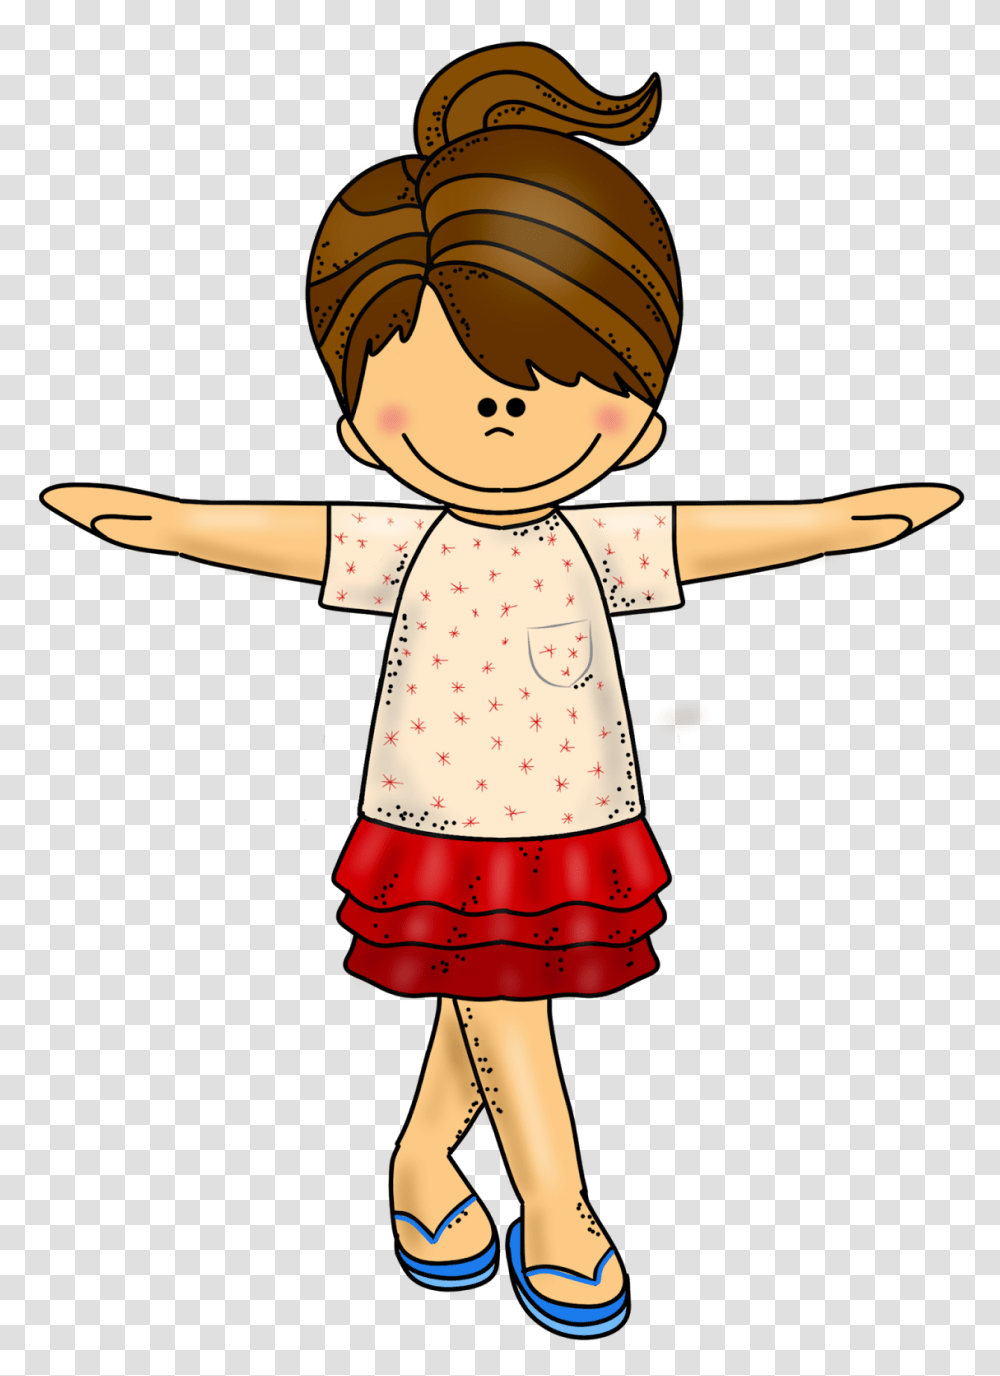 Image Result For Educlips Educlips School Clip, Doll, Toy, Person, Human Transparent Png